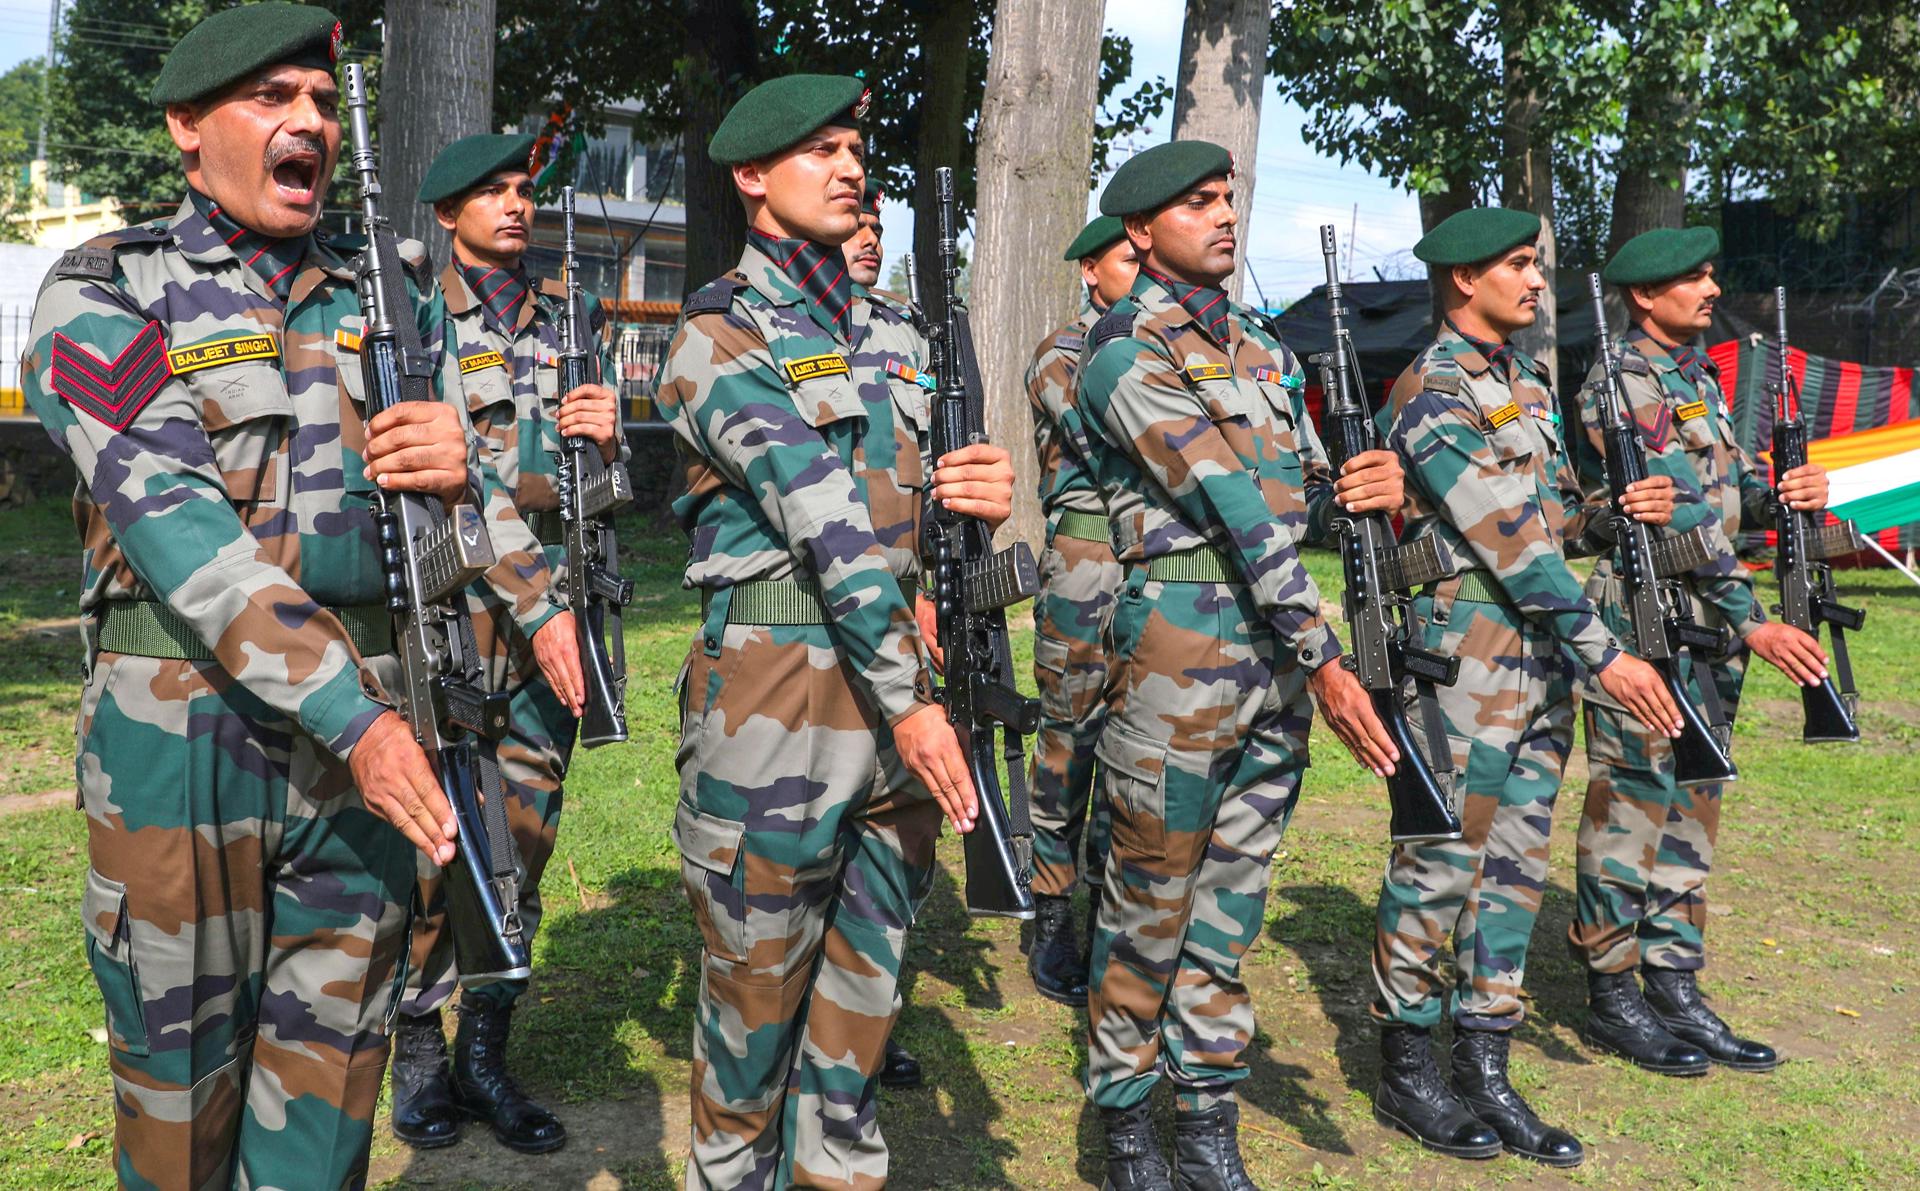 Indian army soldiers attend the 'Kargil Vijay Diwas' or victory day celebration in Srinagar, the summer capital of Indian Kashmir, 26 July 2022. EFE/EPA/FILE/FAROOQ KHAN